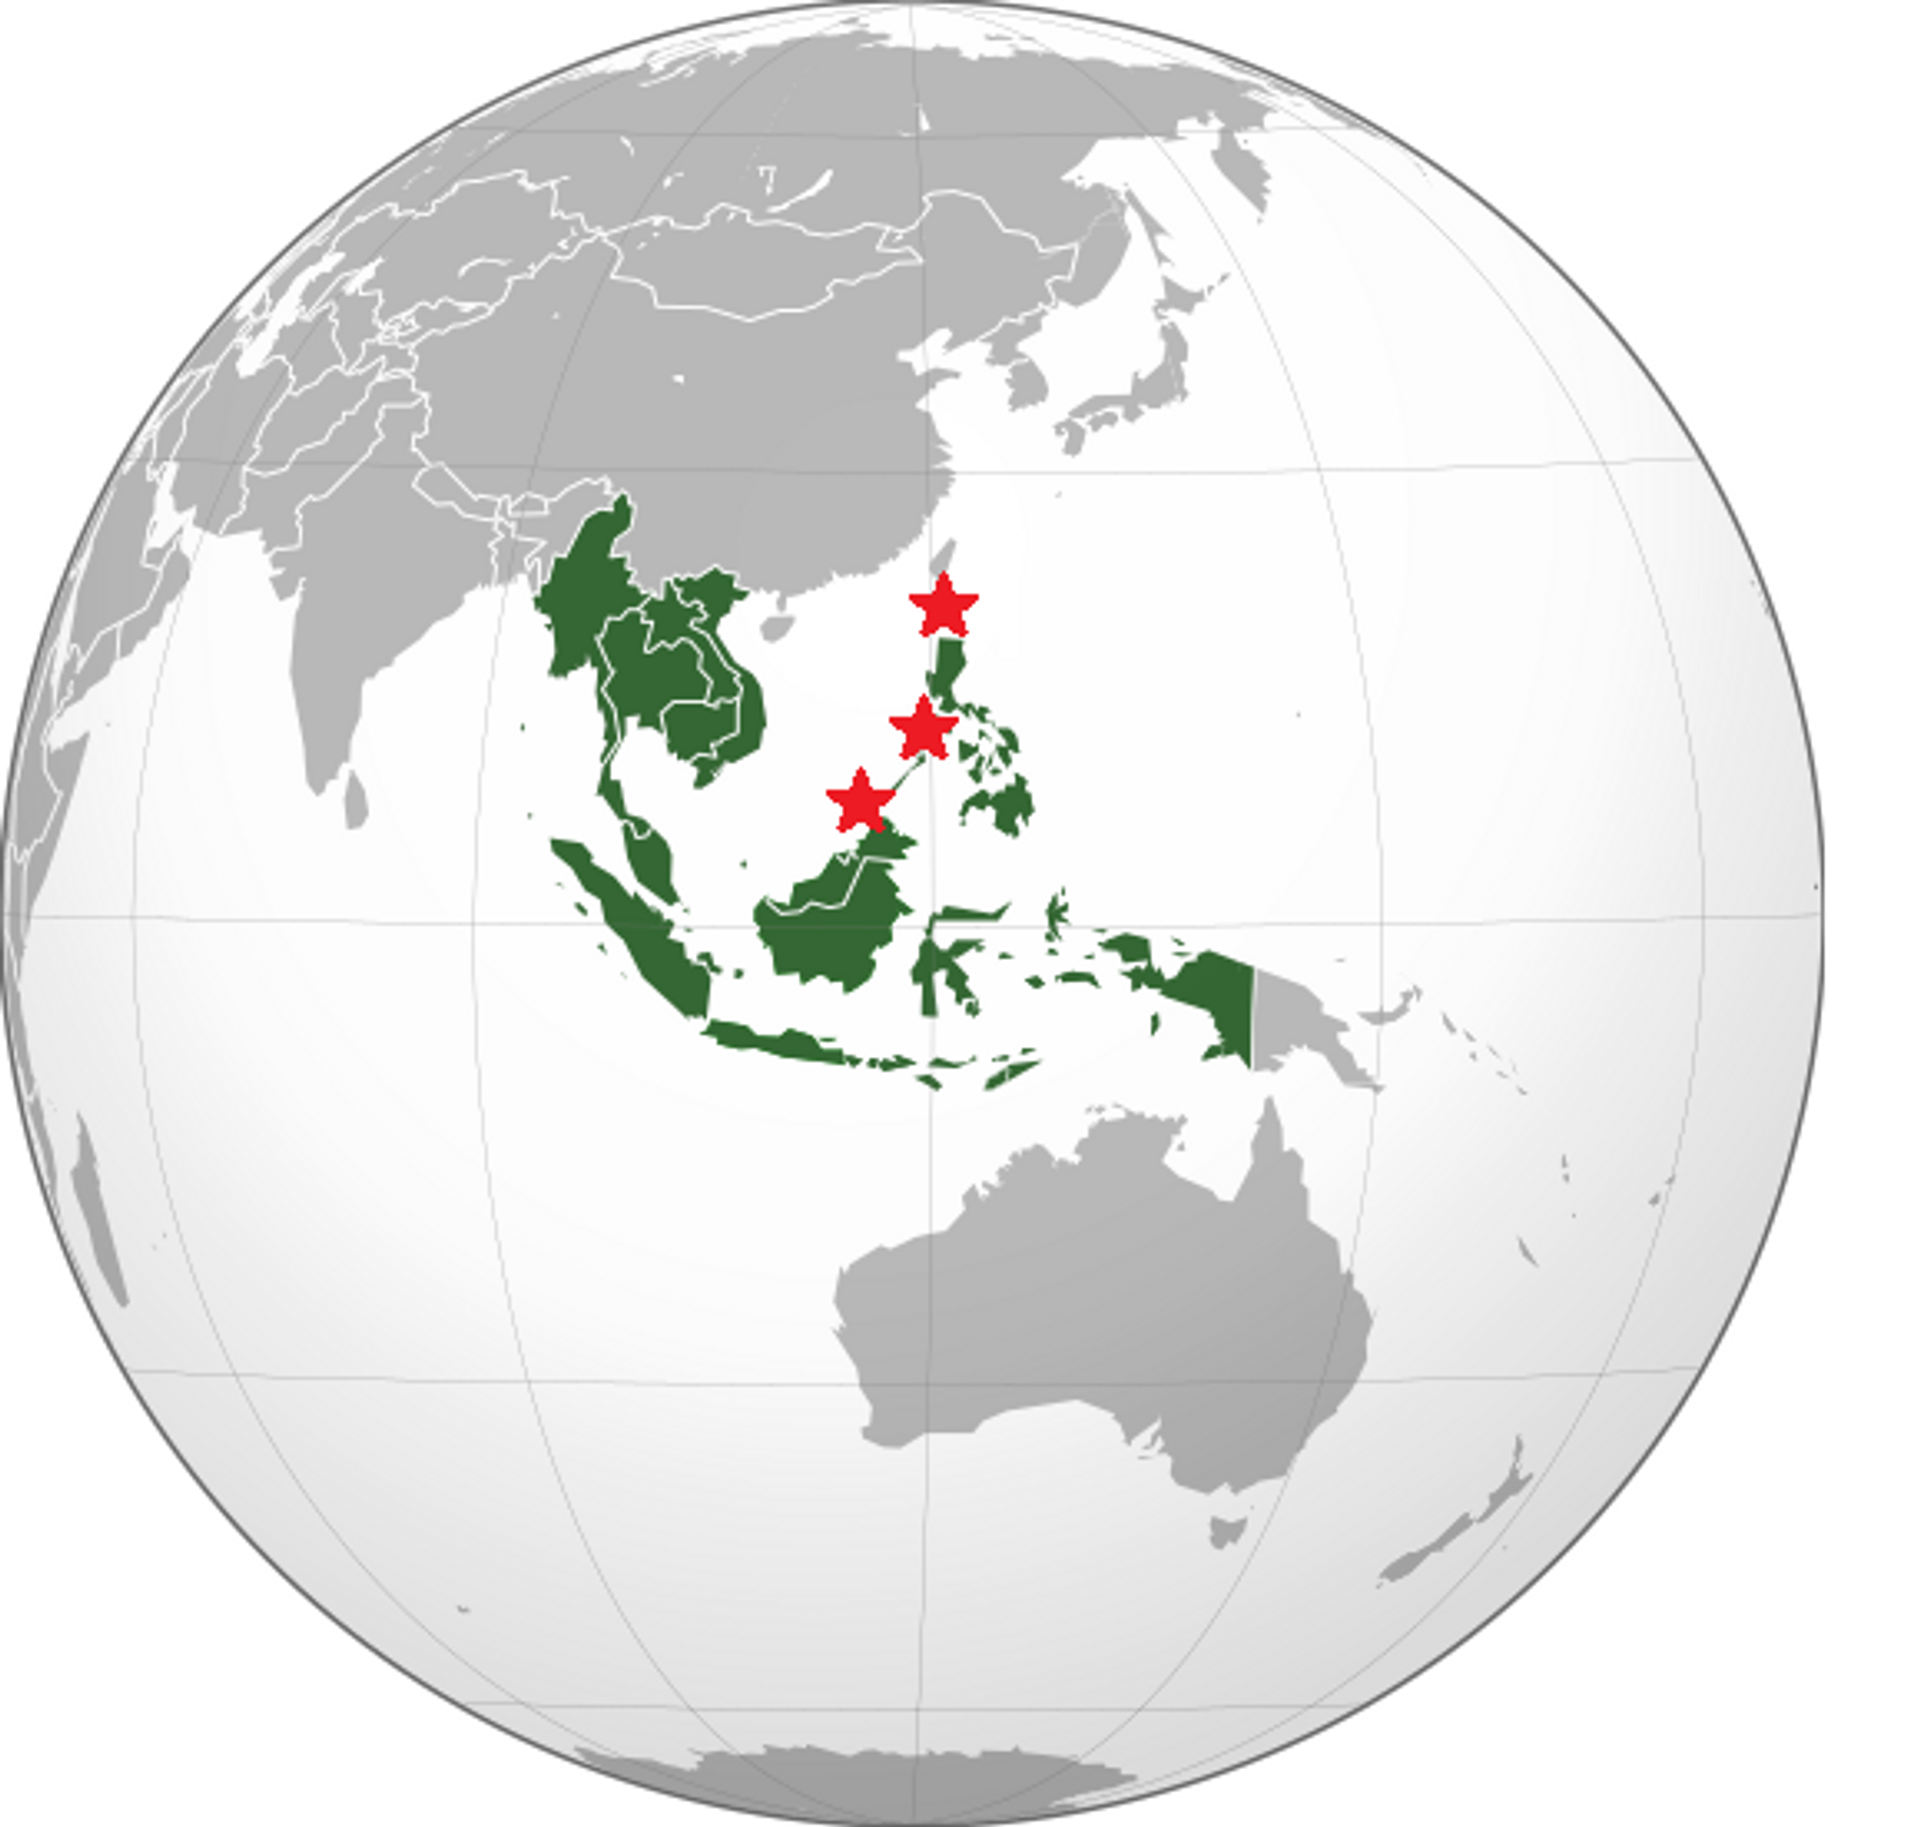 Map of Southeast Asia (green) showing strategic maritime choke points which could cut off China's access to the world's oceans via the Philippines in the event of a US-China conflict. - Sputnik International, 1920, 16.02.2023